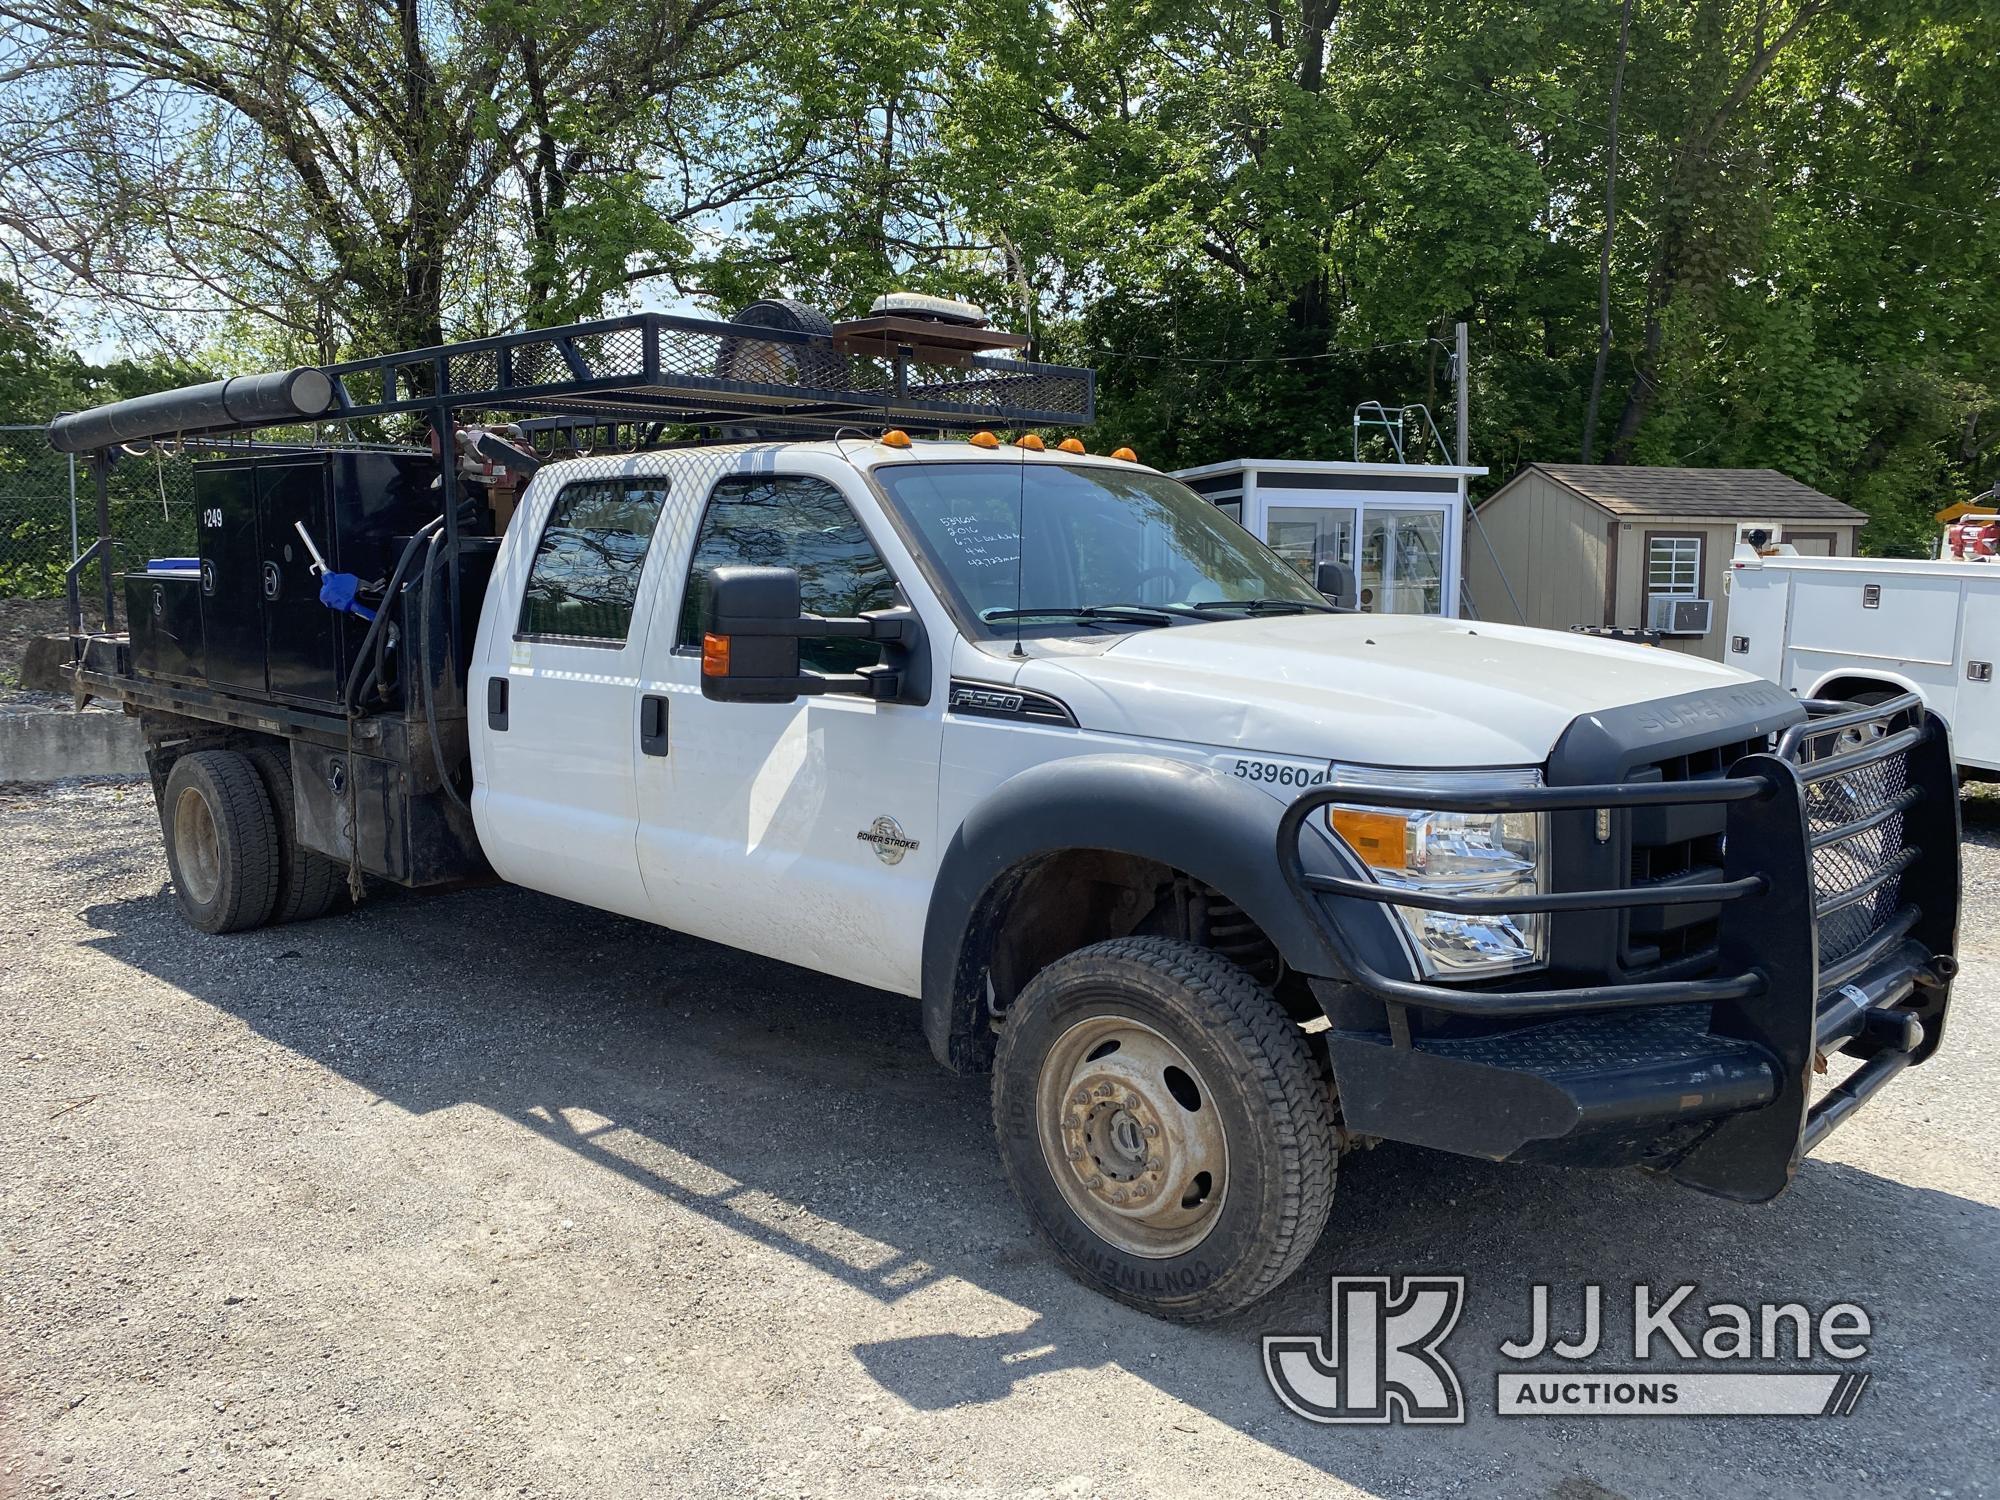 (Plymouth Meeting, PA) 2016 Ford F550 4x4 Crew-Cab Flatbed Truck Runs & Moves, Check Engine Light On